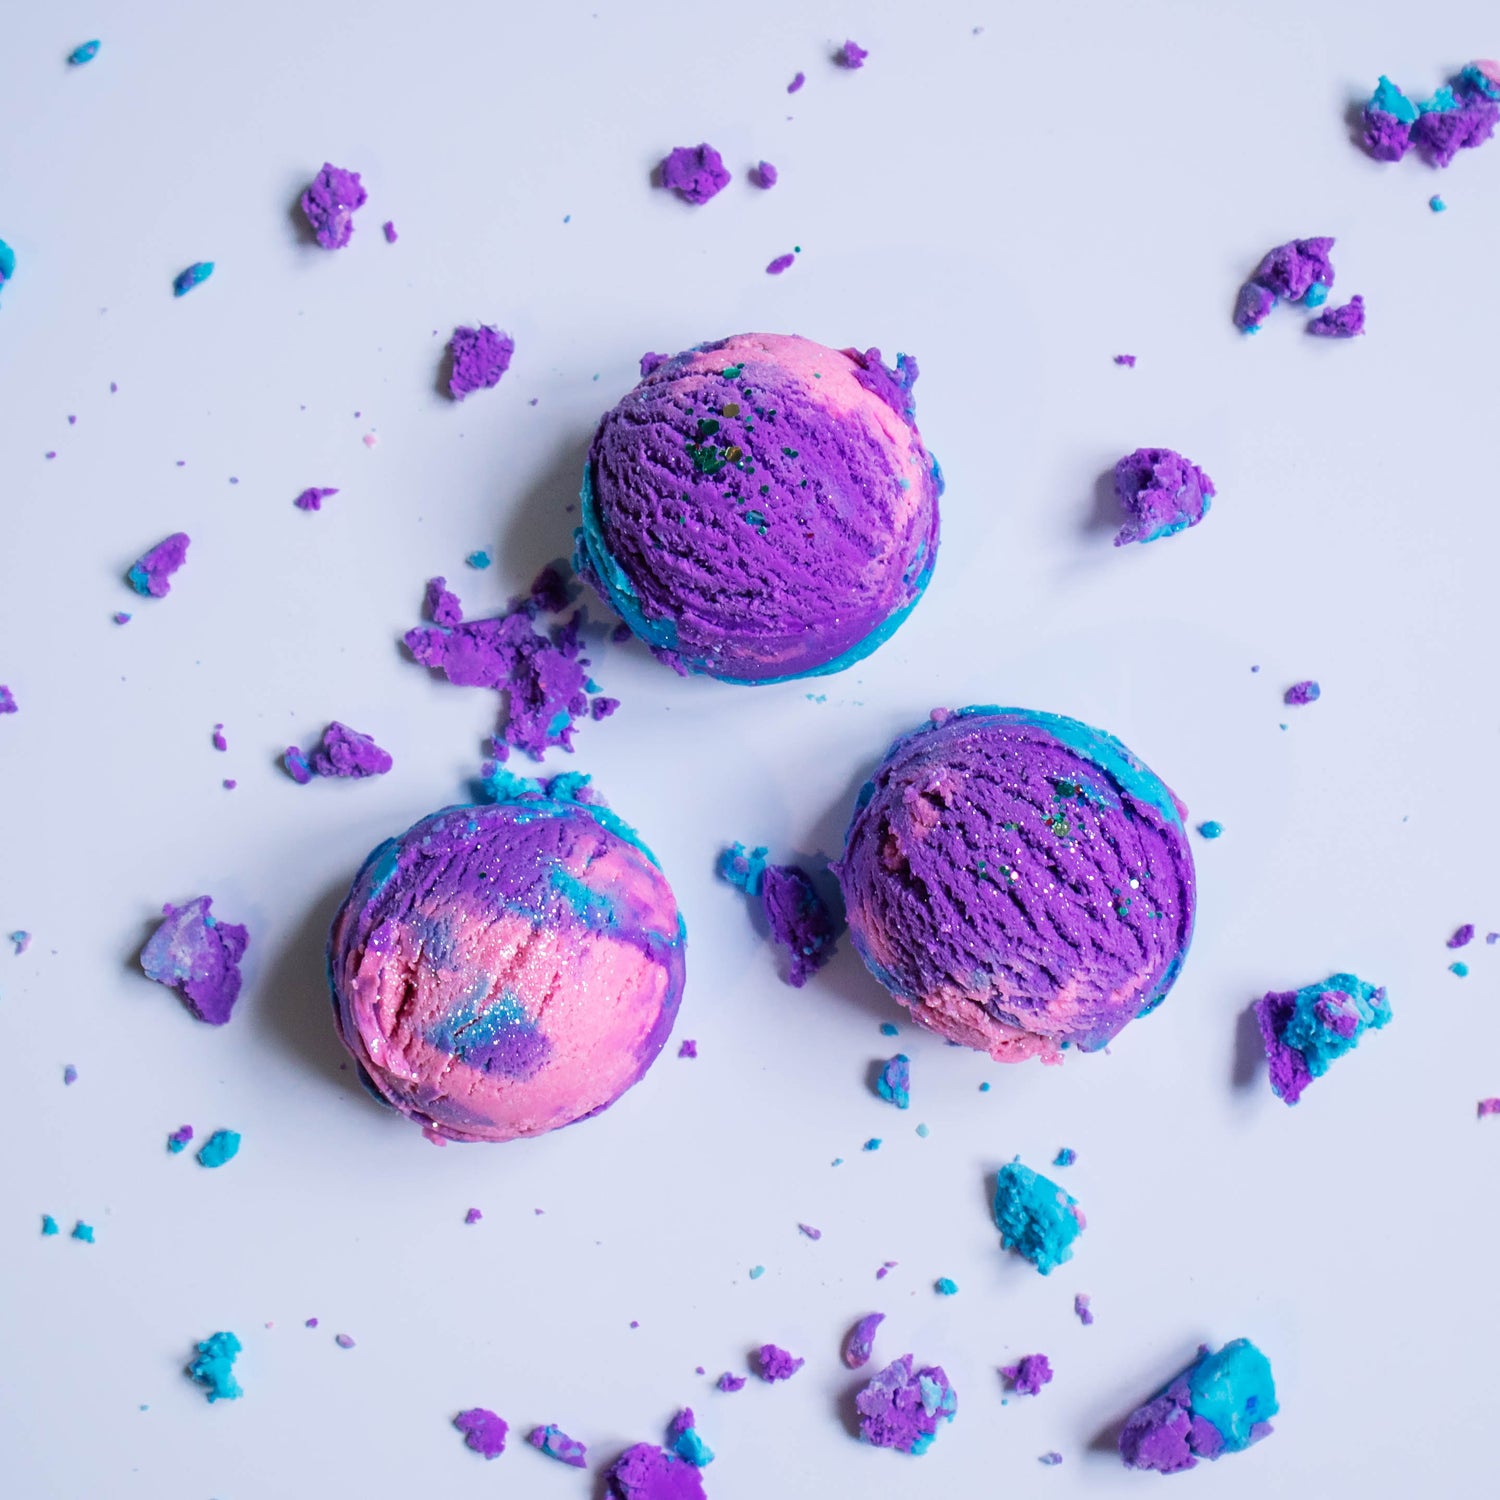 In this top down view there are 3 bubble scoops showing the purple, pink and blue swirls and the glitter that is on top. There are bubble bath crumbles scattered around the white surface.